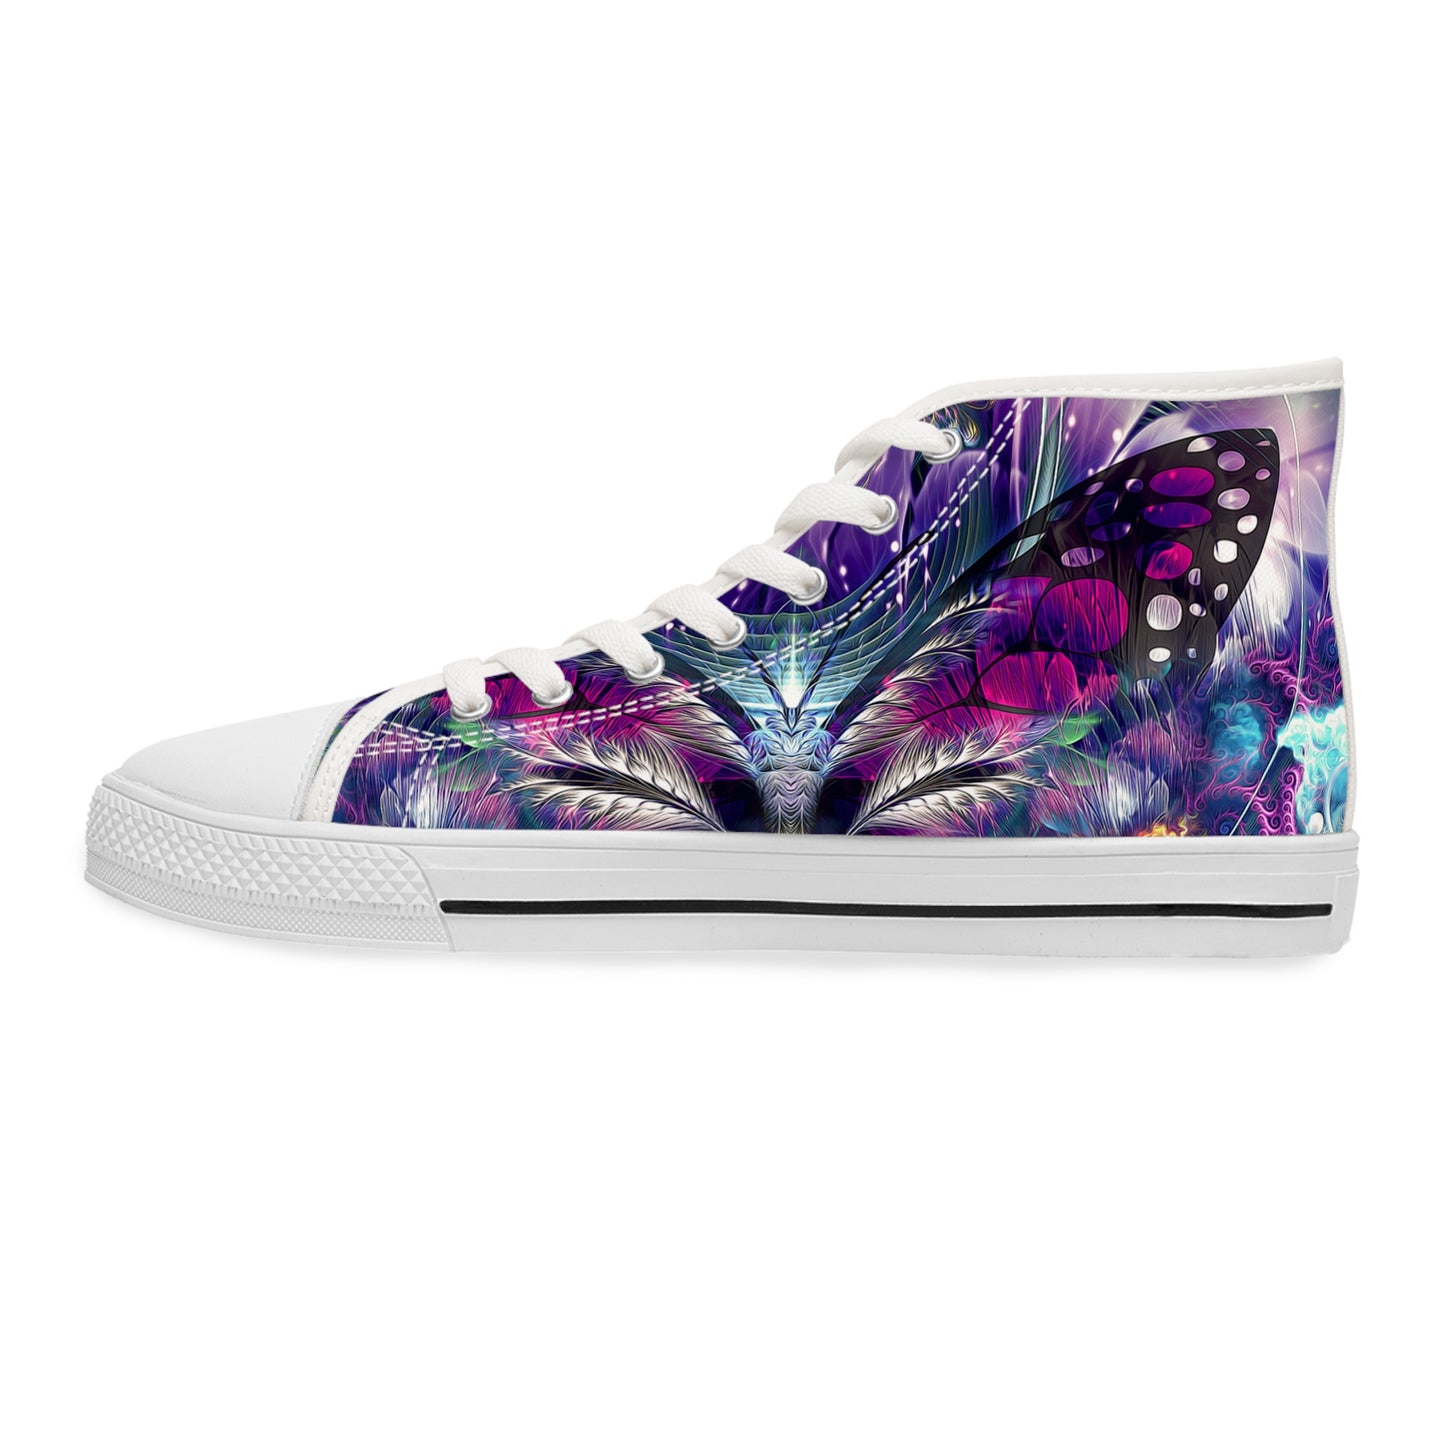 "Emergence V2" WOMEN'S HIGH TOP SNEAKERS